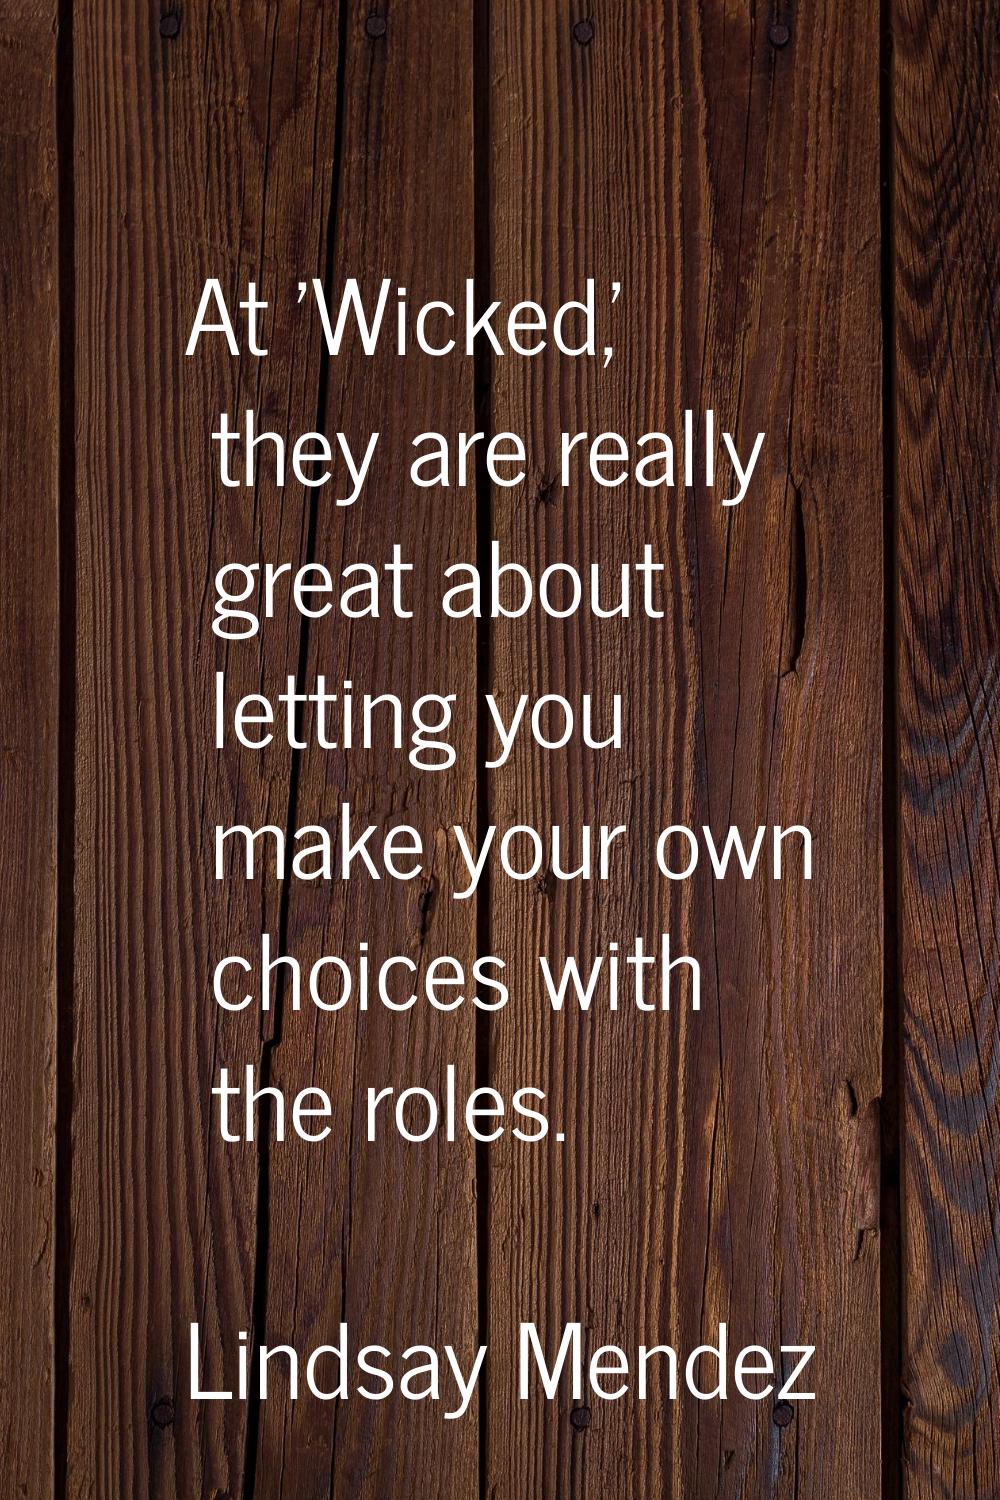 At 'Wicked,' they are really great about letting you make your own choices with the roles.